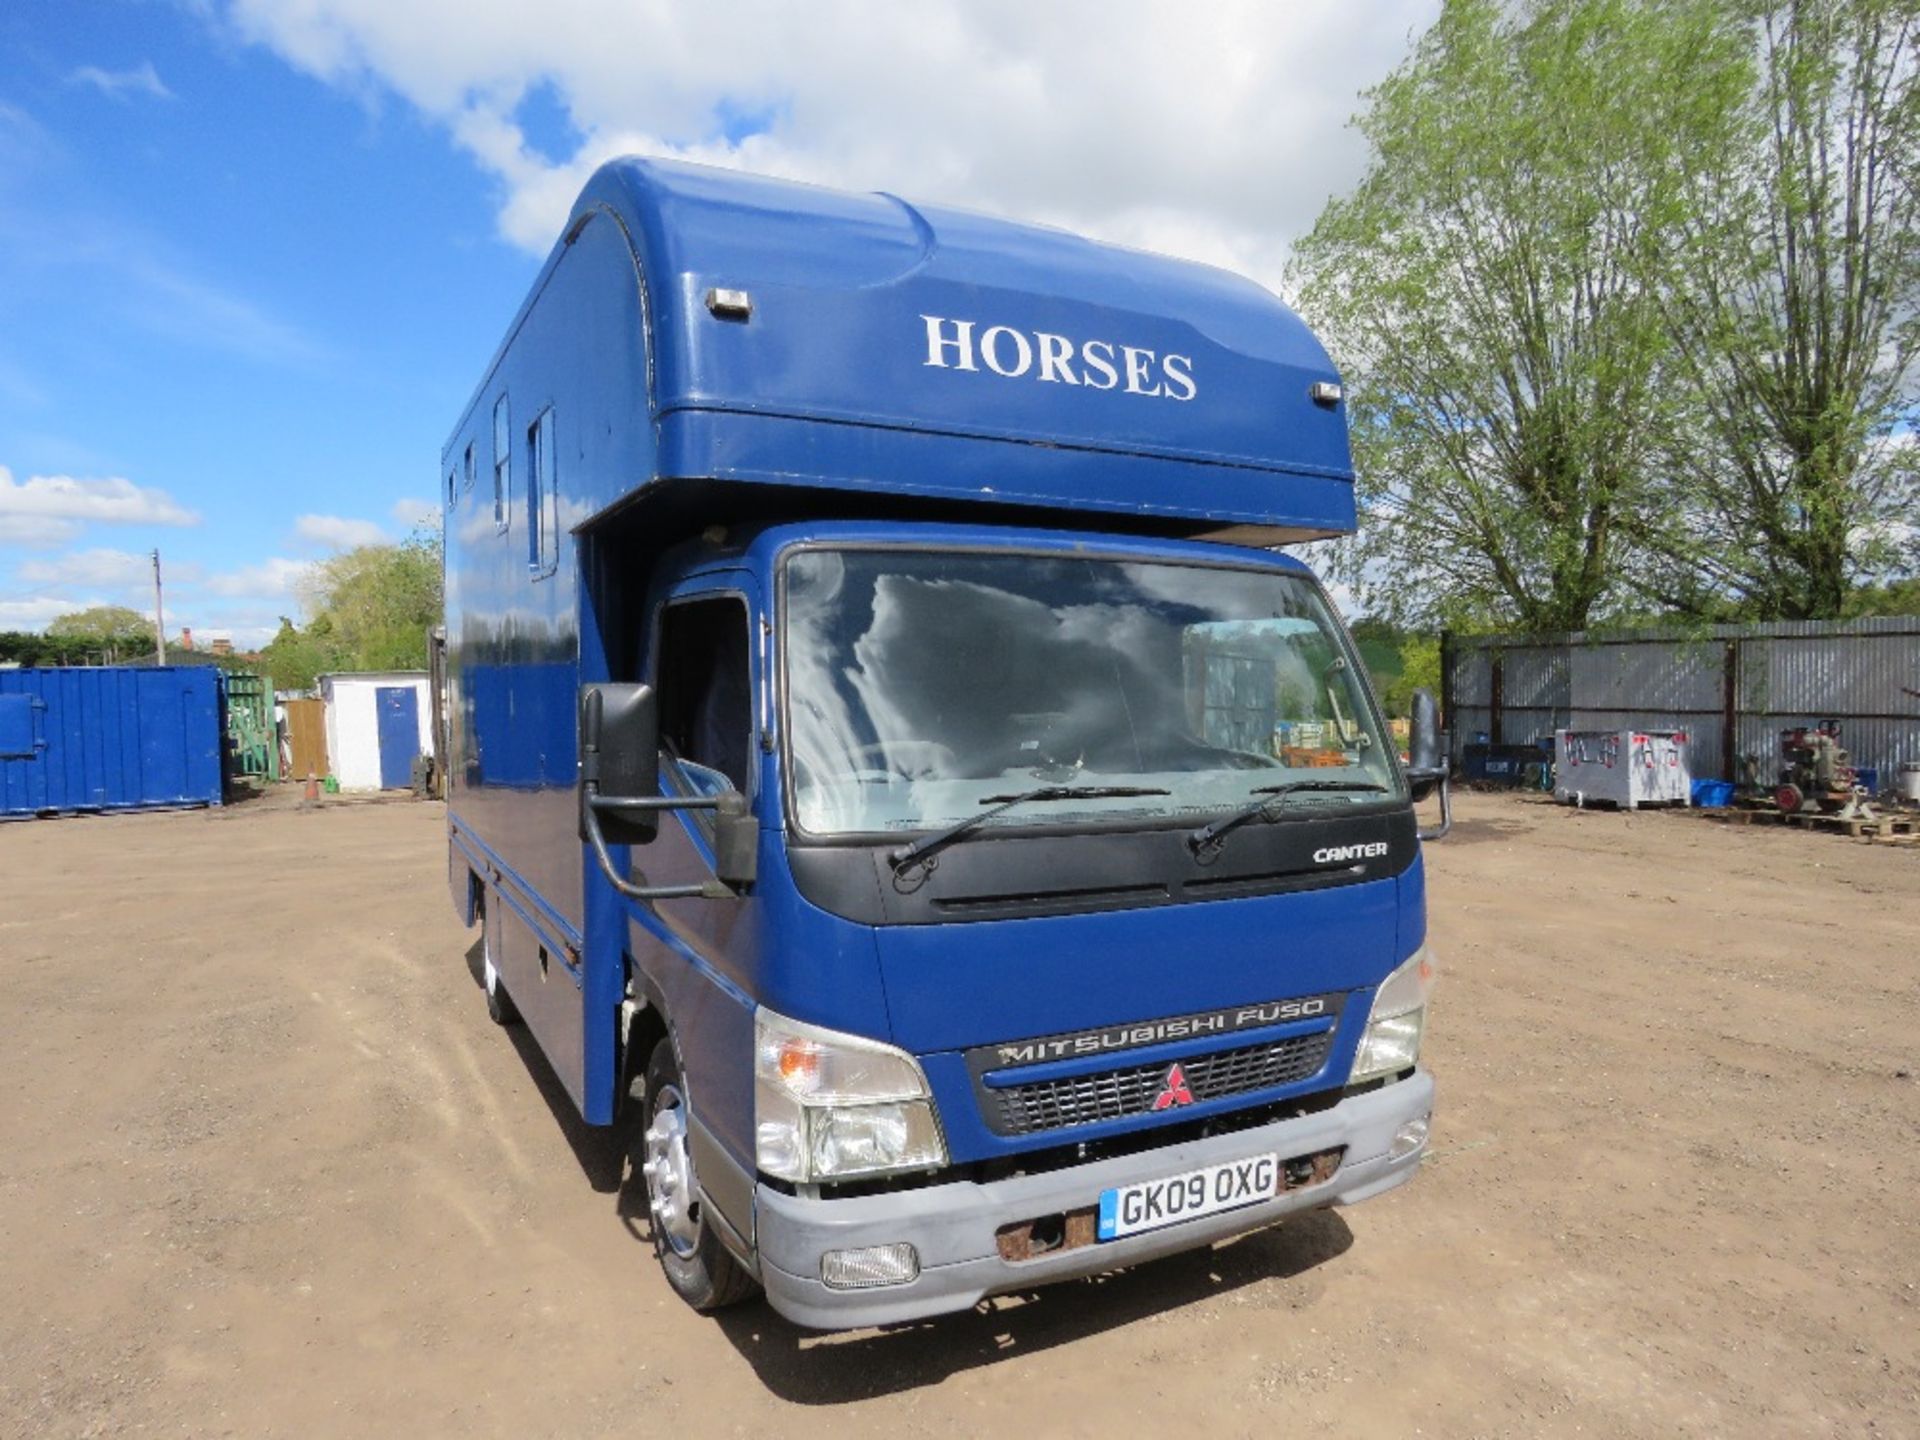 MITSUBISHI CANTER HORSE BOX LORRY REG:GK09 OXG. V5 AND PLATING CERTIFICATE IN OFFICE. MOT EXPIRED. - Image 2 of 24